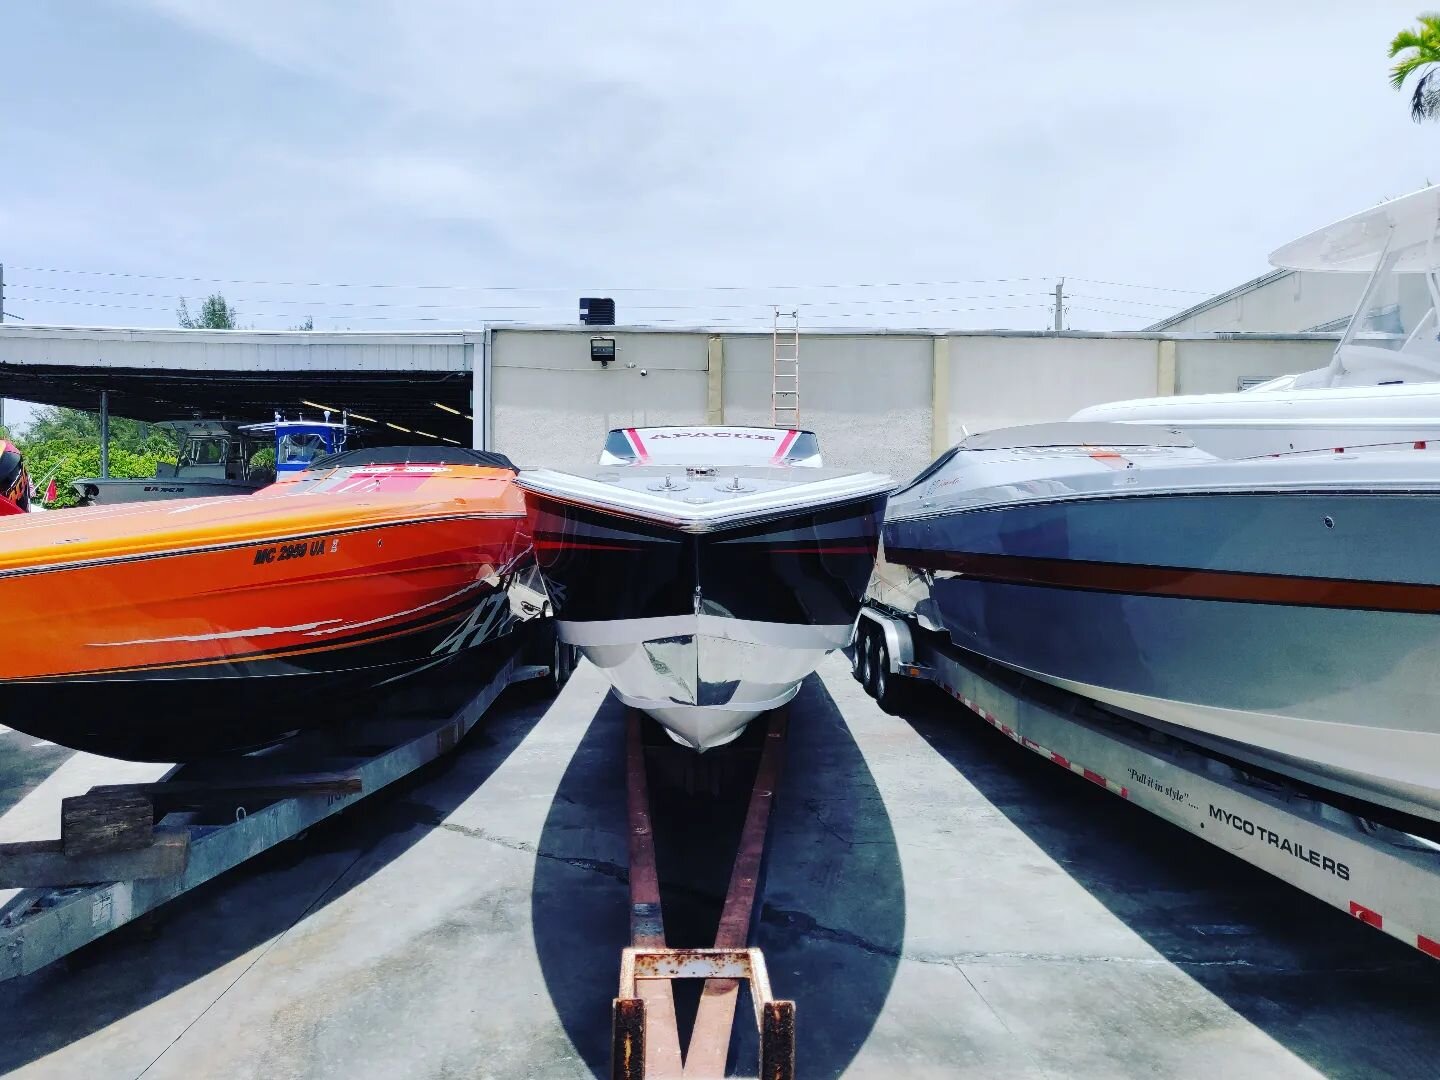 I like this picture for some reason. Some classic offshore boats hanging around. #wavetowave #fastboats #apachepowerboats #cigaretteracing